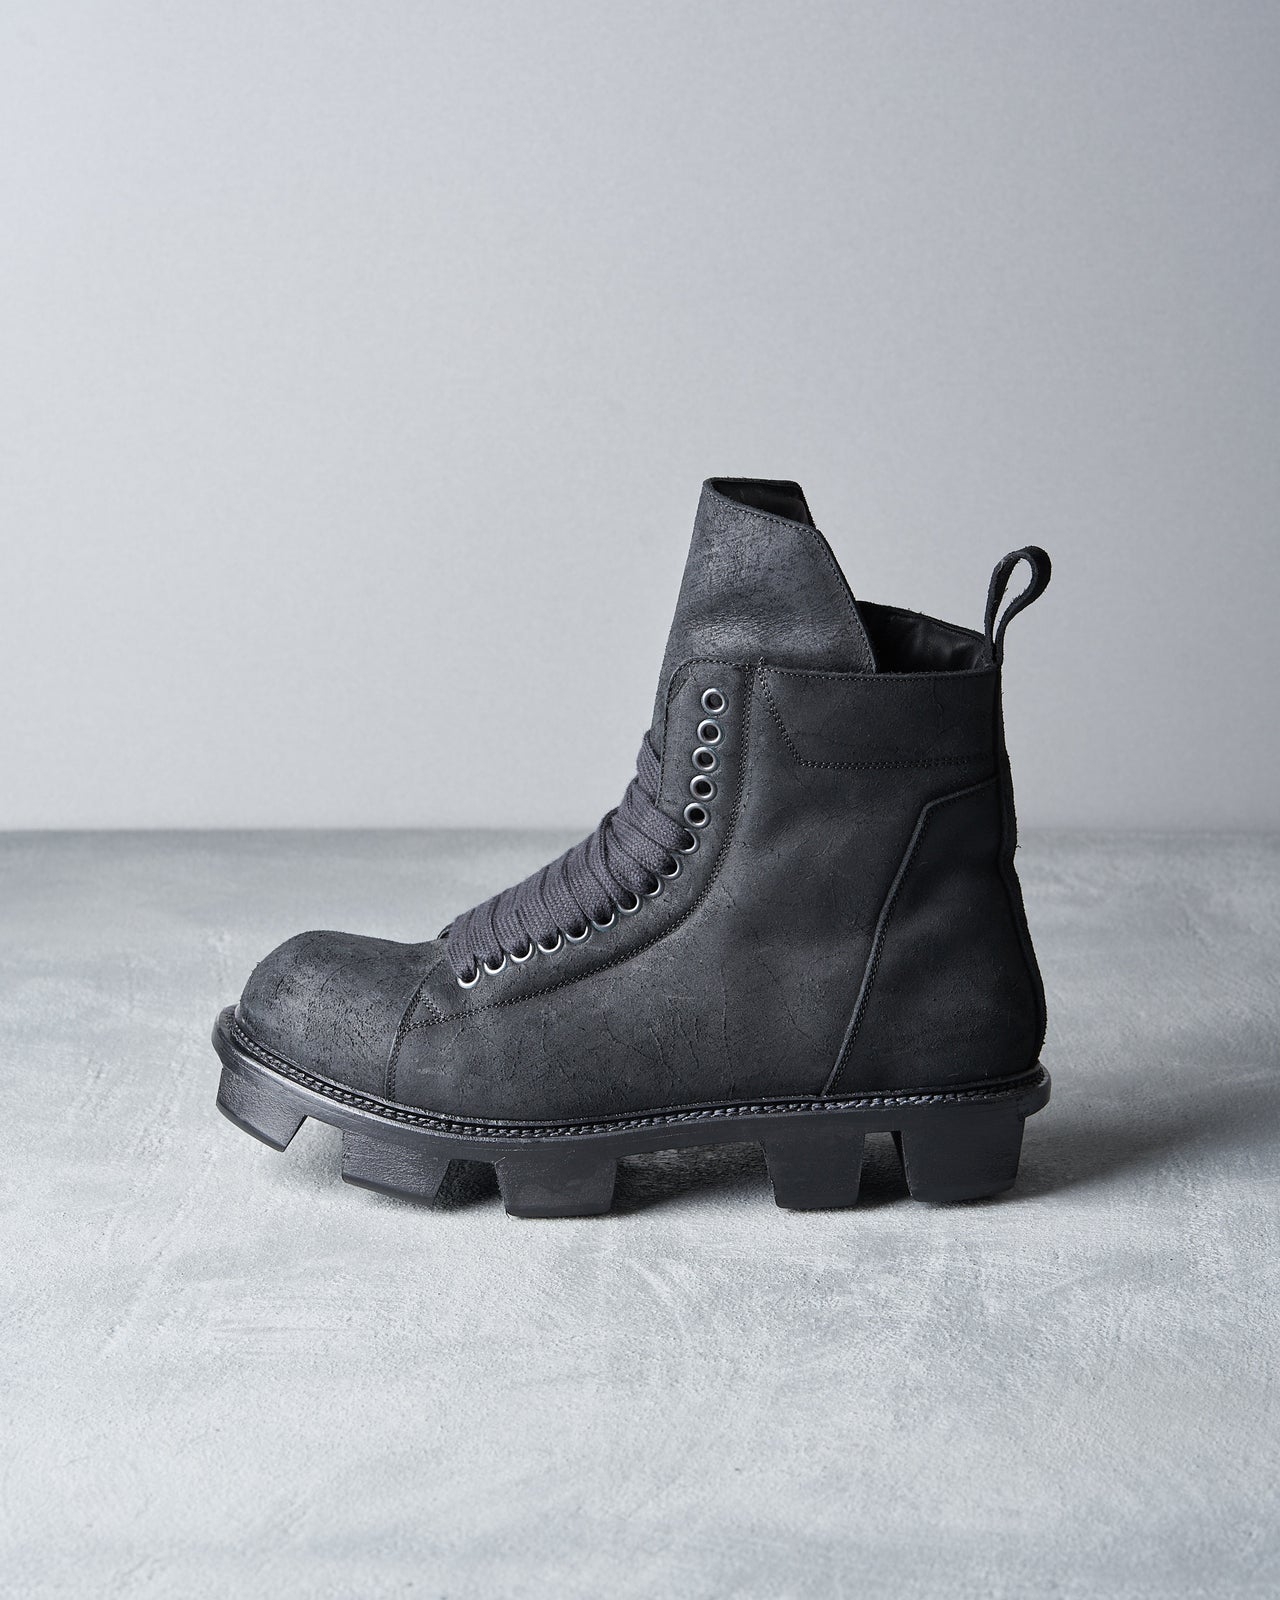 Rick Owens FW 2013 Plinth Hiker leather boot